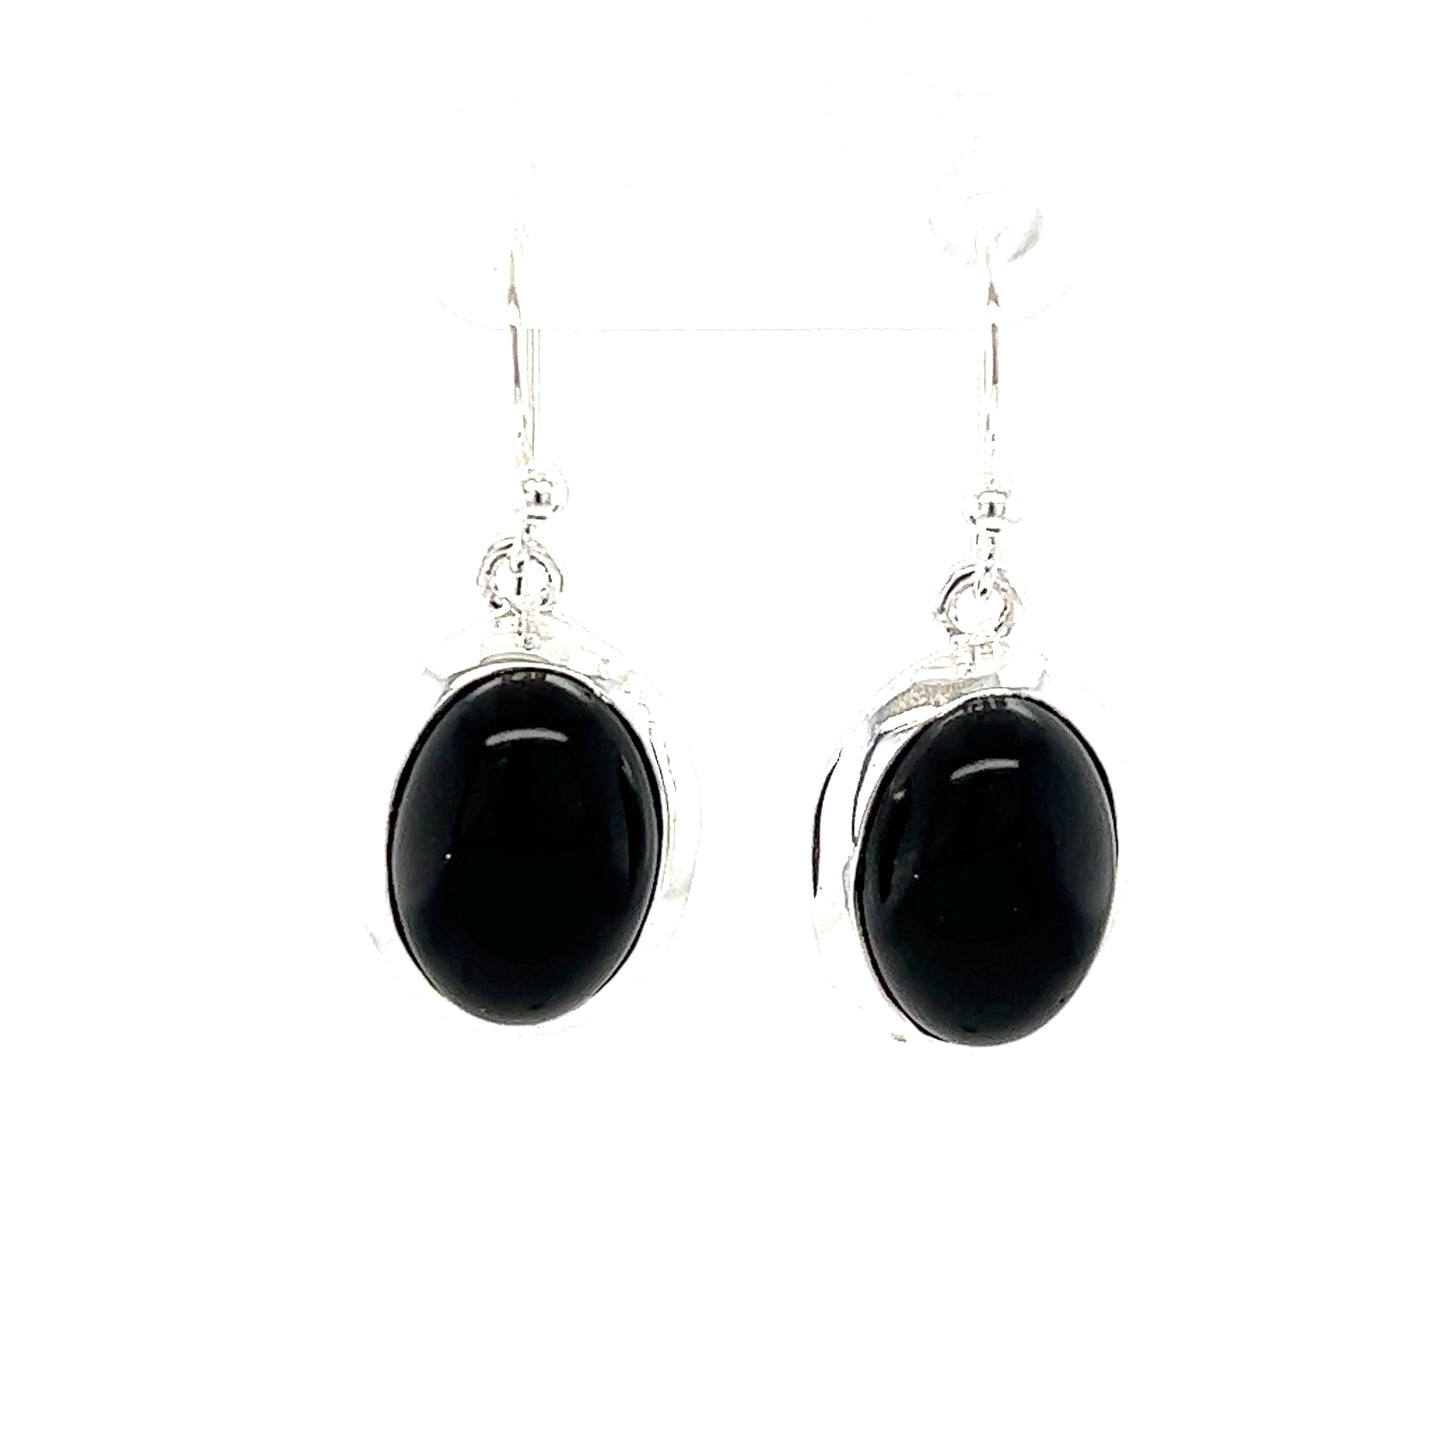 A pair of Super Silver Oval Onyx Earrings featuring a 14mm stone, showcased against a white background.